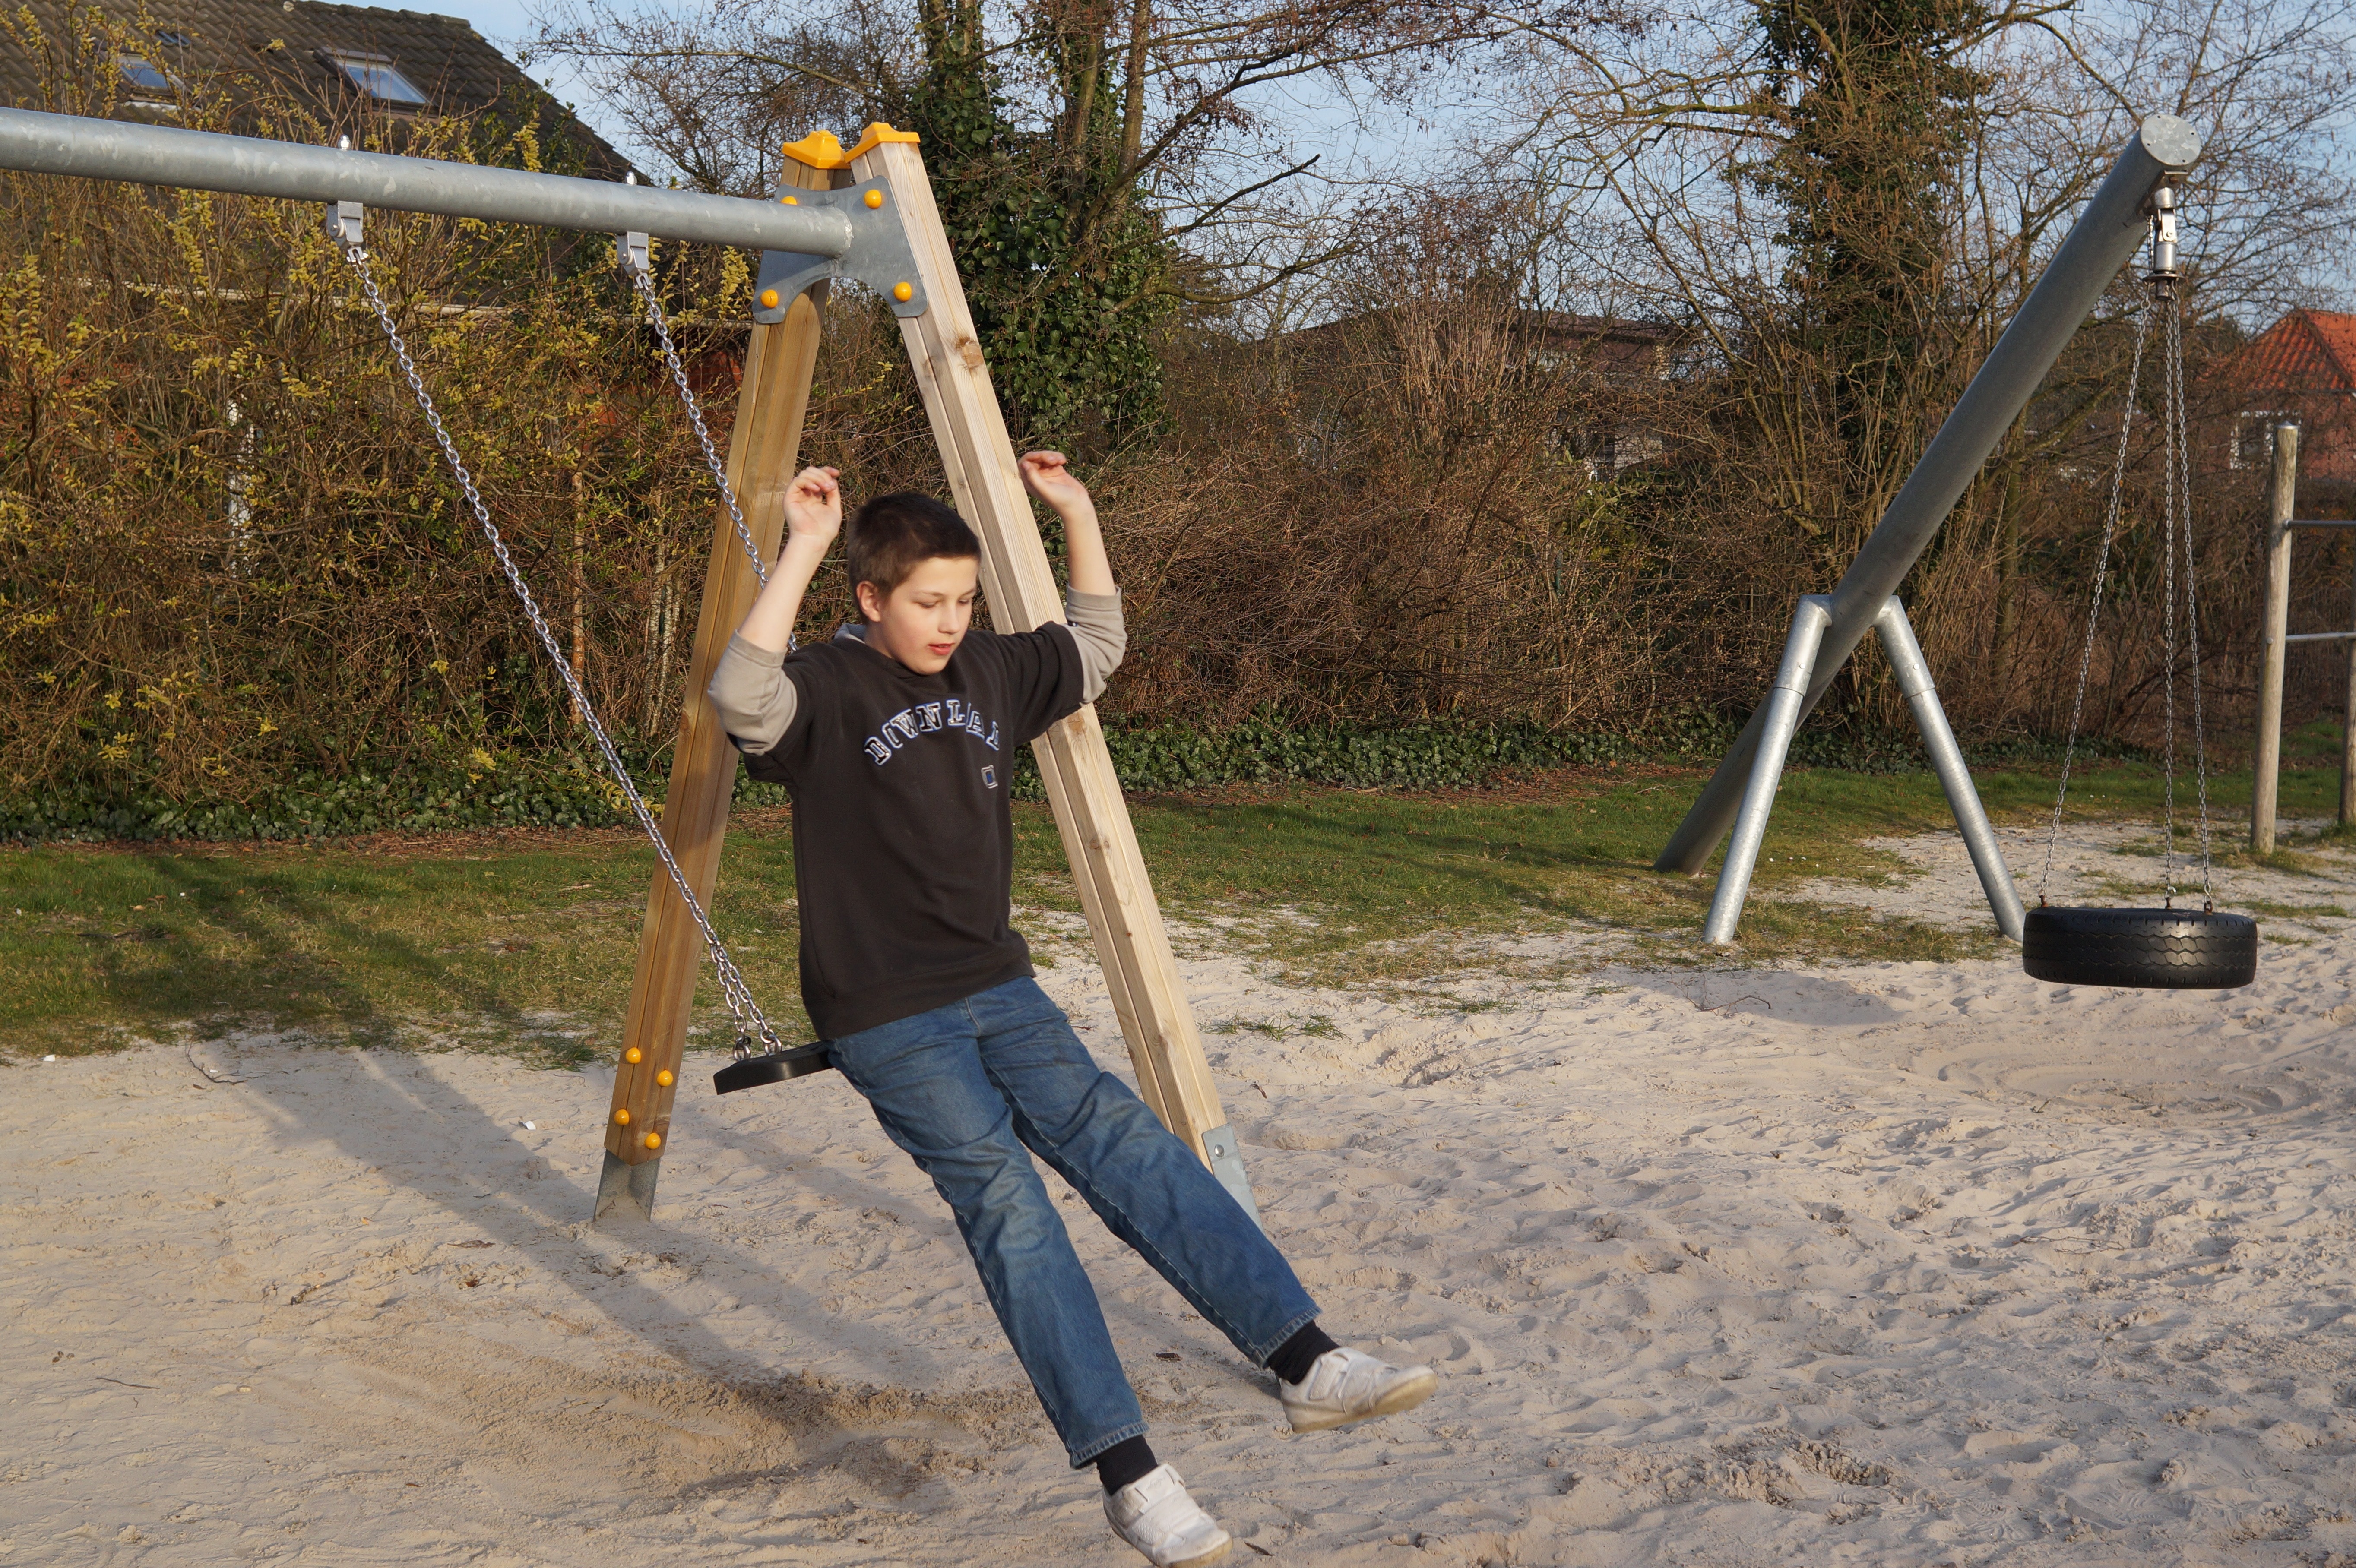 boy's brown crew neck shirt, blue jeans and white low top sneakers outfit riding a brown swing